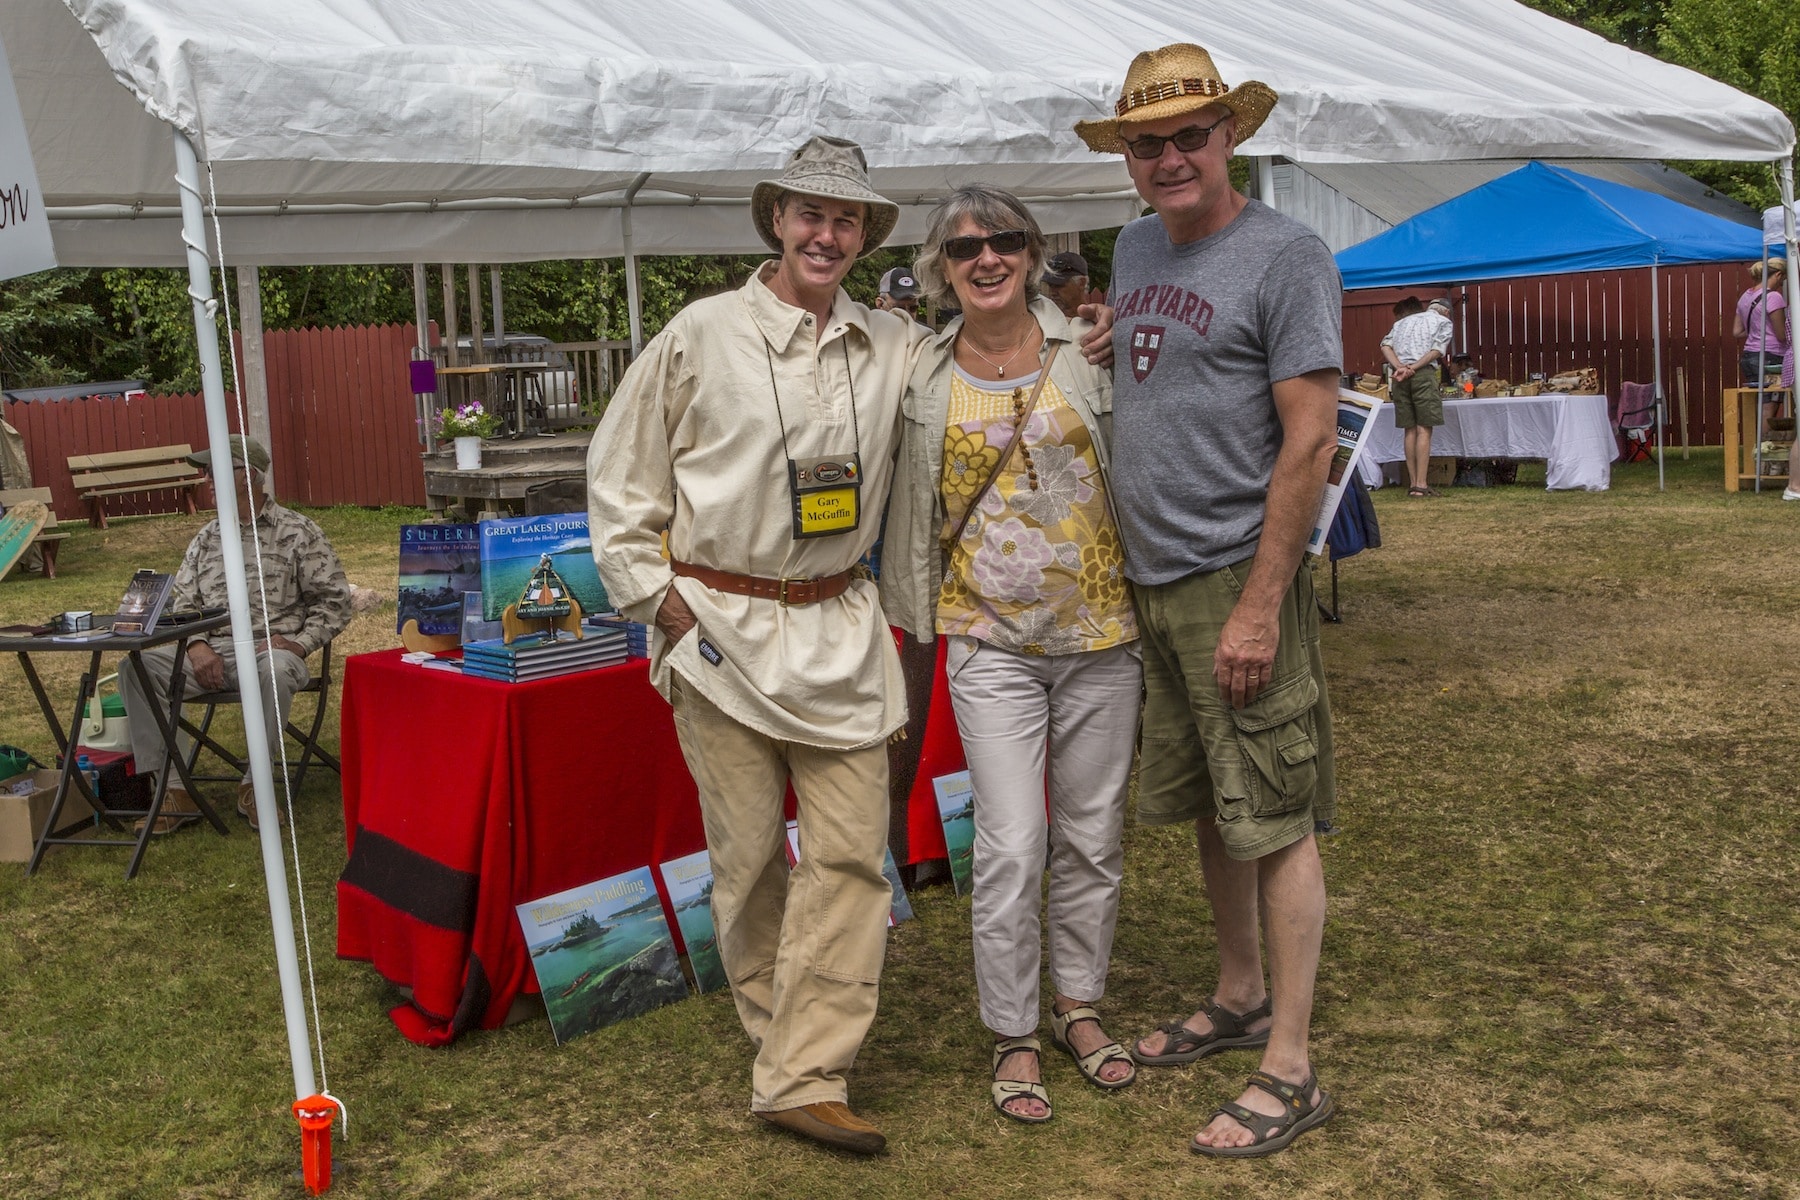 Geri and Enzo Turchet were among the many local friends that dropped by to visit our display at the Art on the Bay event at Batchawana Bay on Sat August 8th